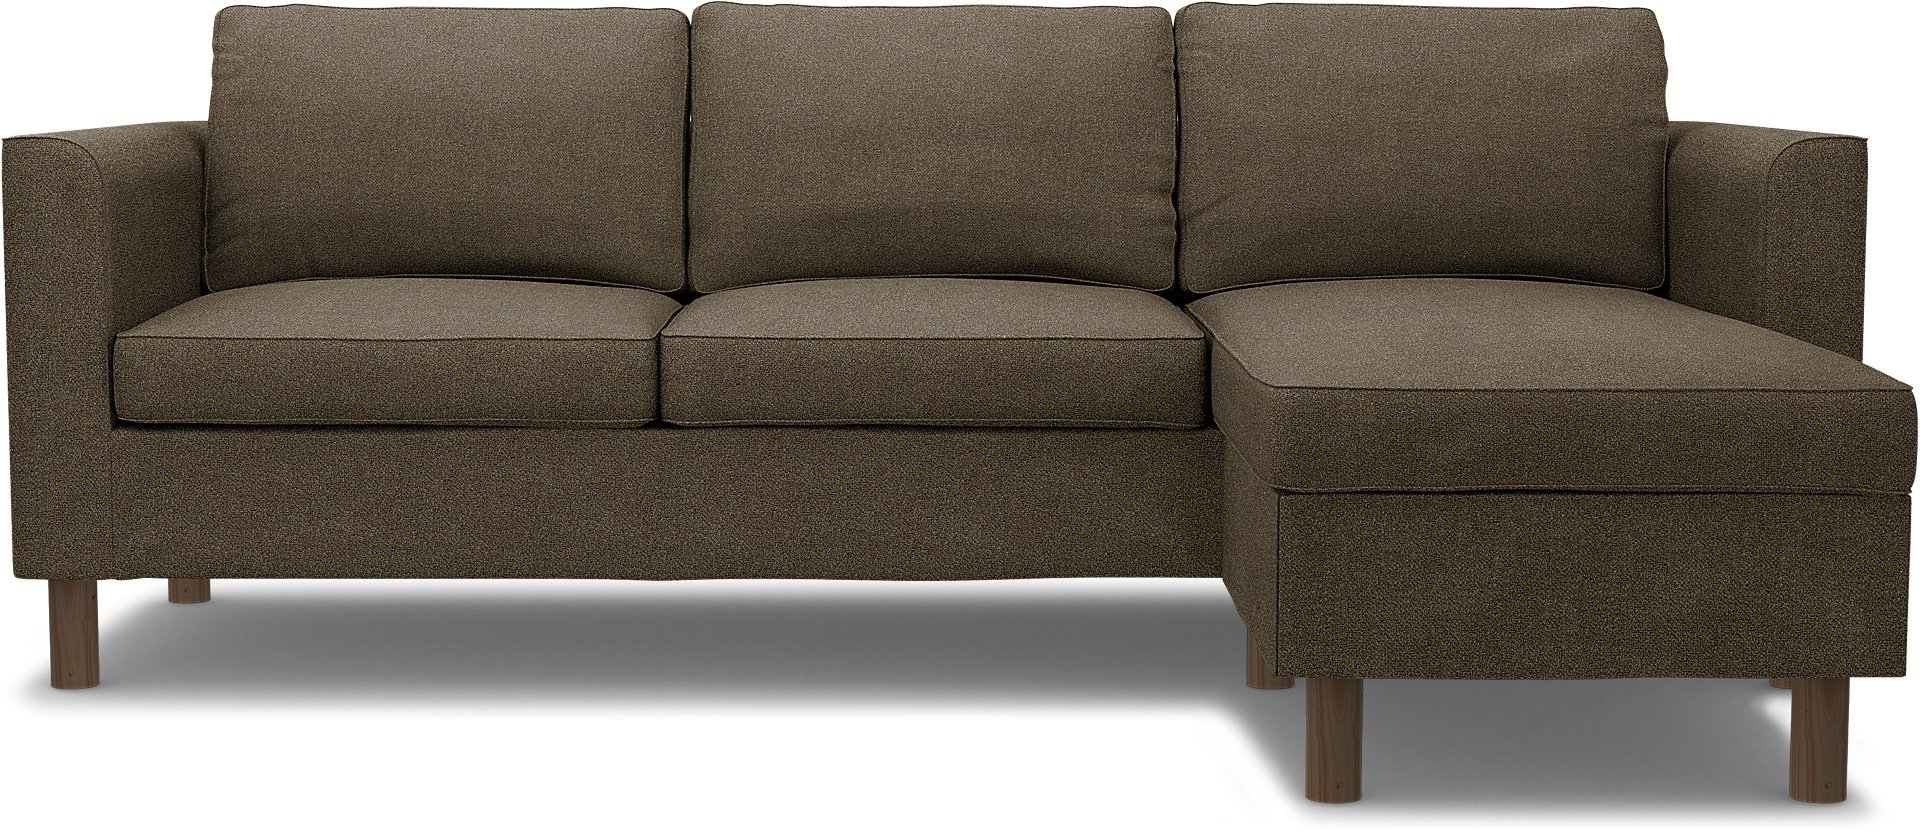 IKEA - Parup 3 Seater with chaise longue, Cocoa, Boucle & Texture - Bemz